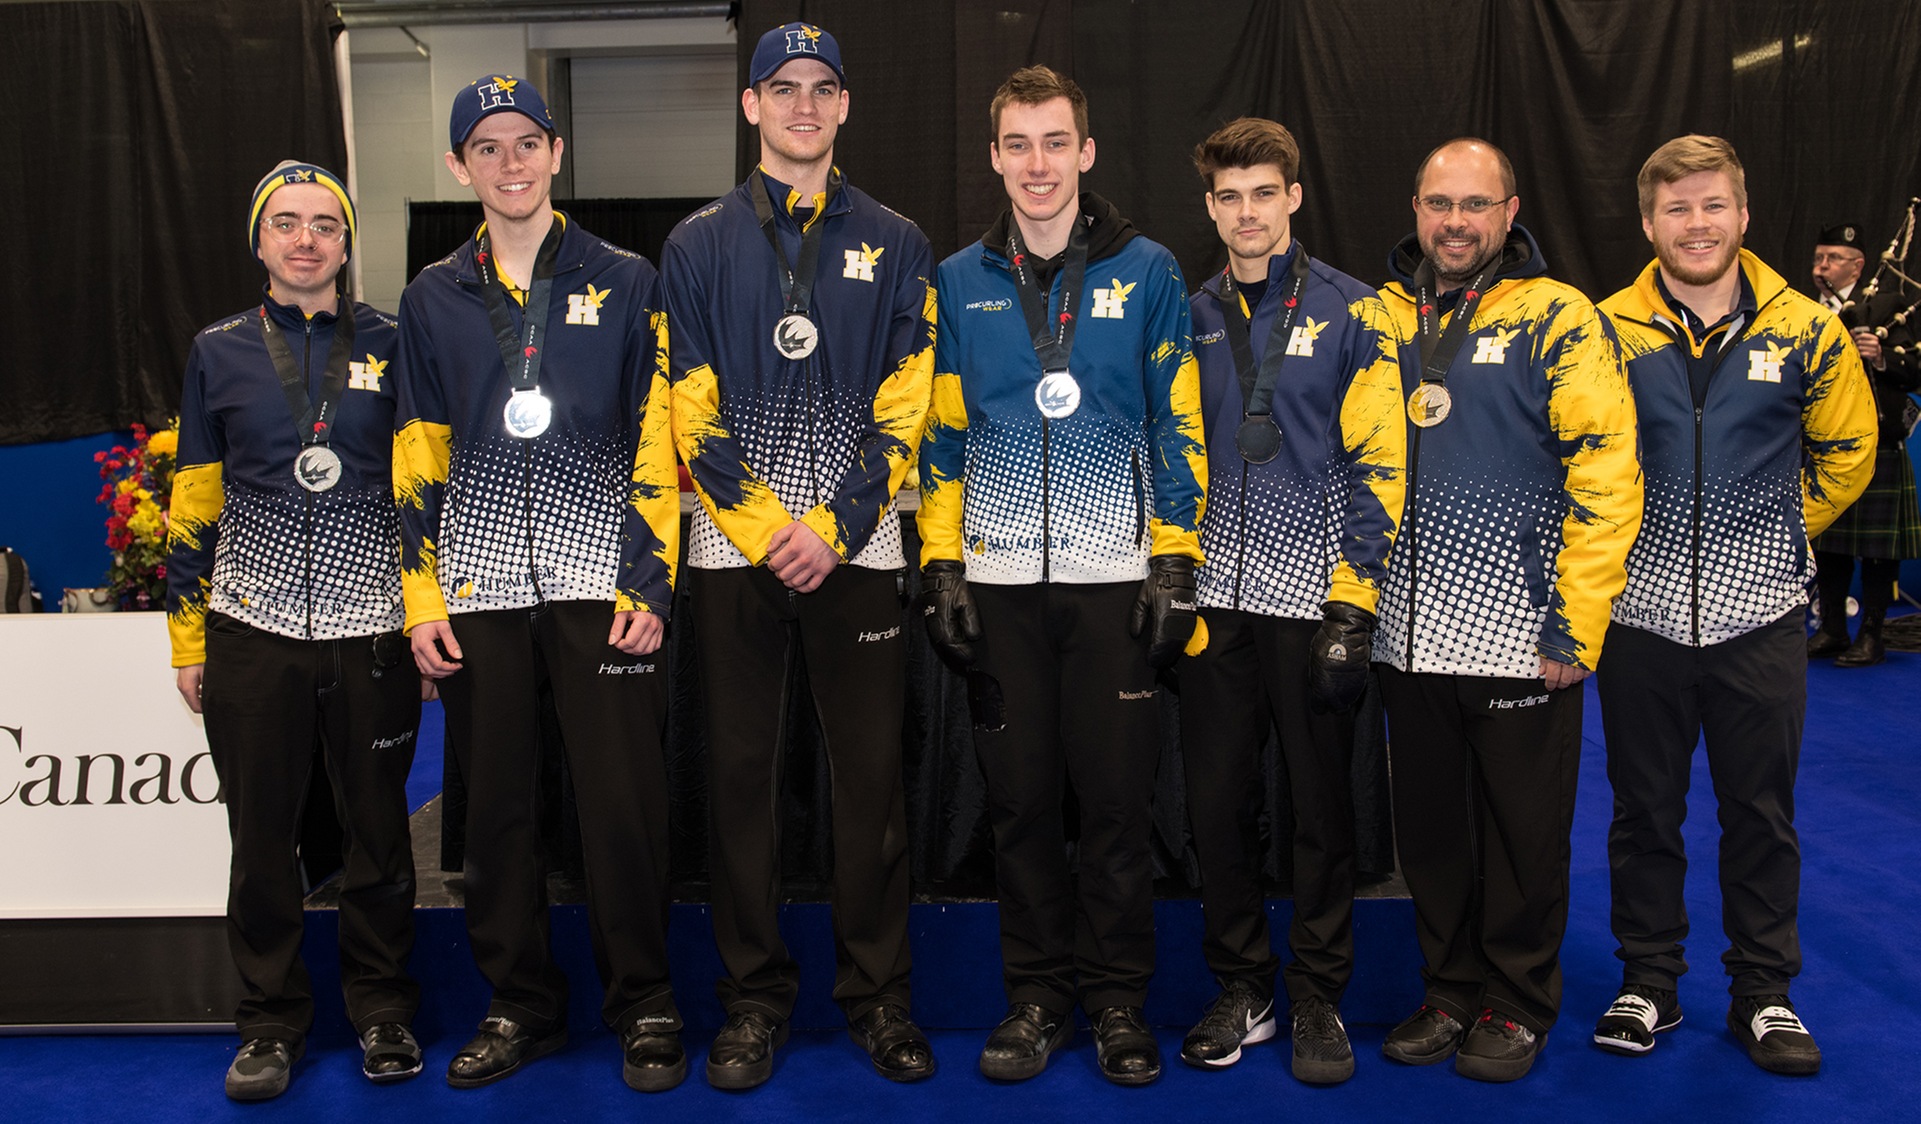 HAWKS ARE YOUR 2019 CCAA NATIONAL CURLING SILVER MEDALISTS